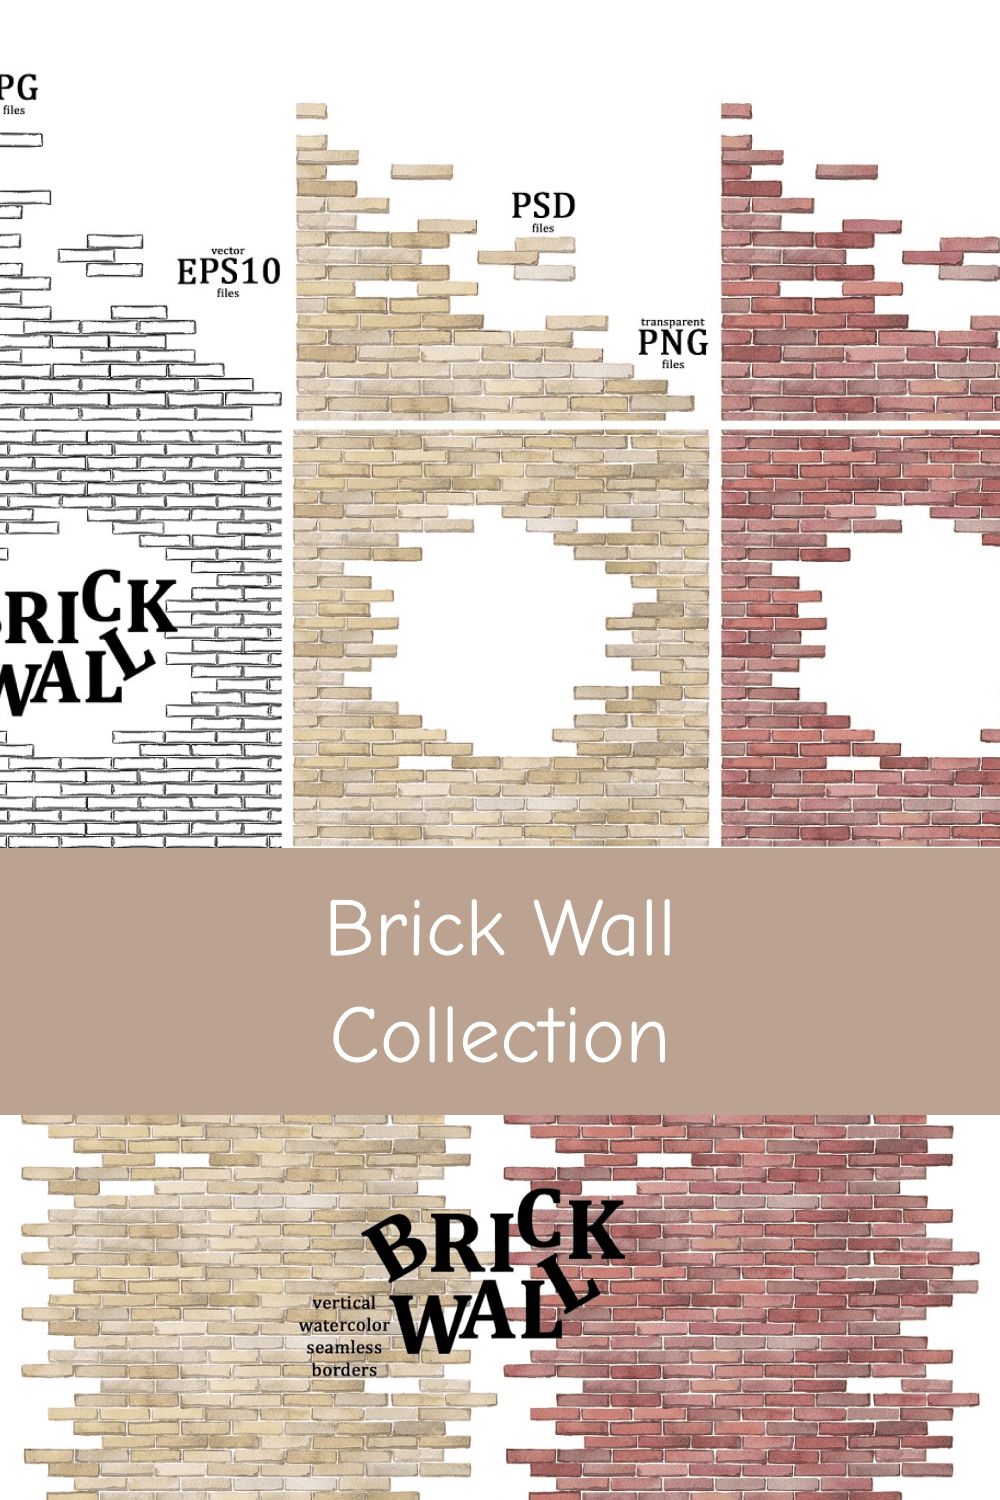 03 brick wall collection pinterest